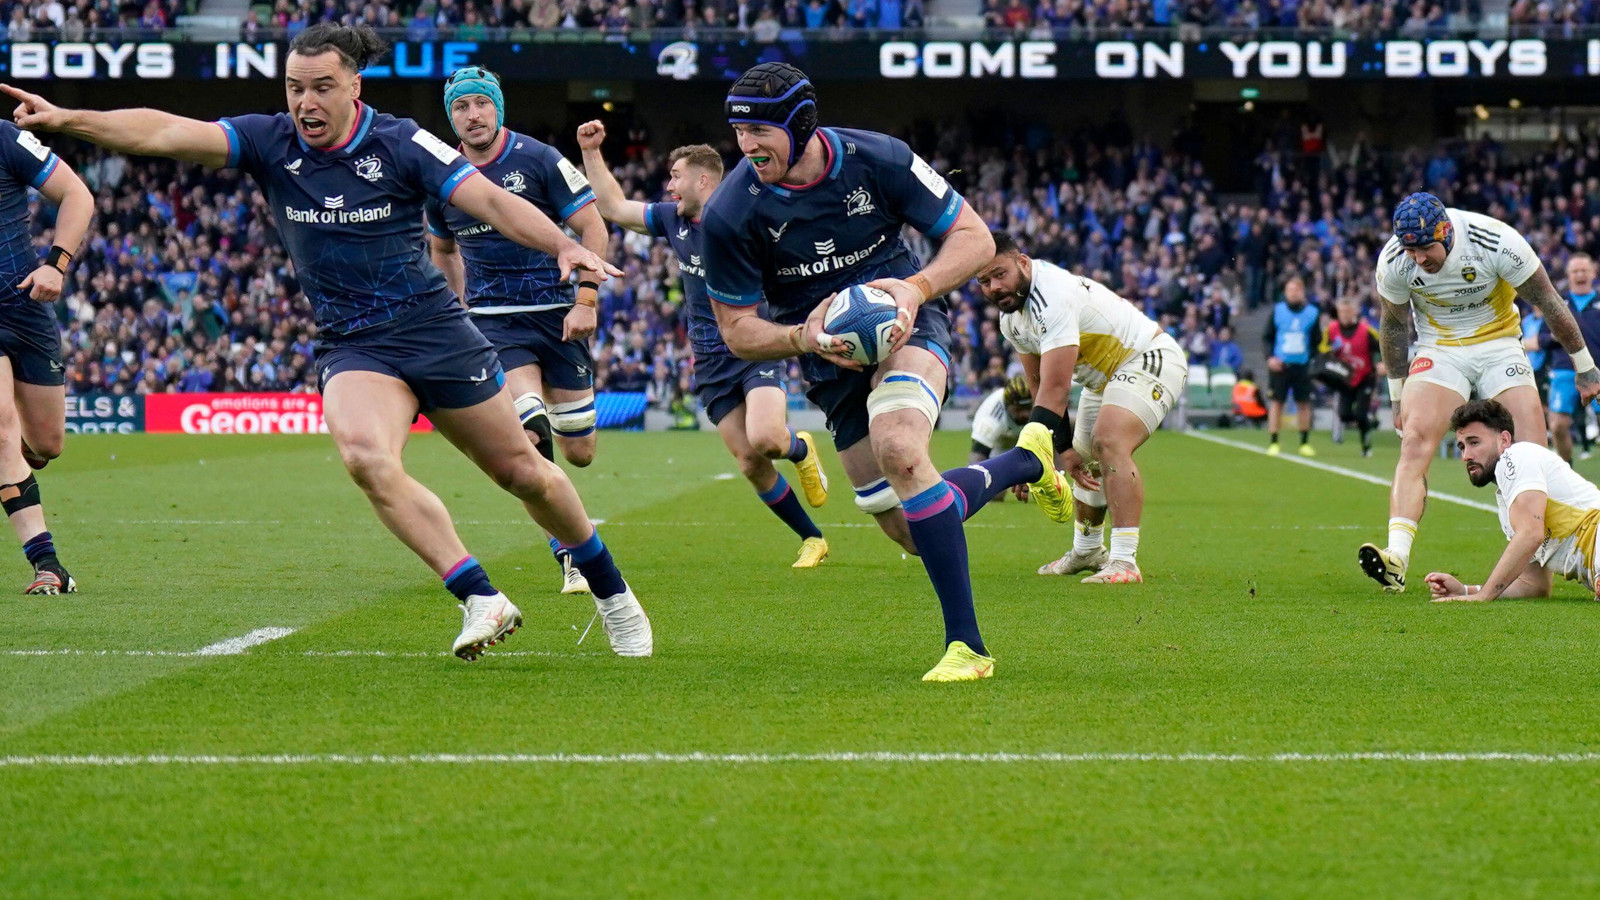 leinster v la rochelle: five takeaways from the champions cup quarter-final as jacques nienaber’s influence telling in irishmen’s ‘relentless’ display